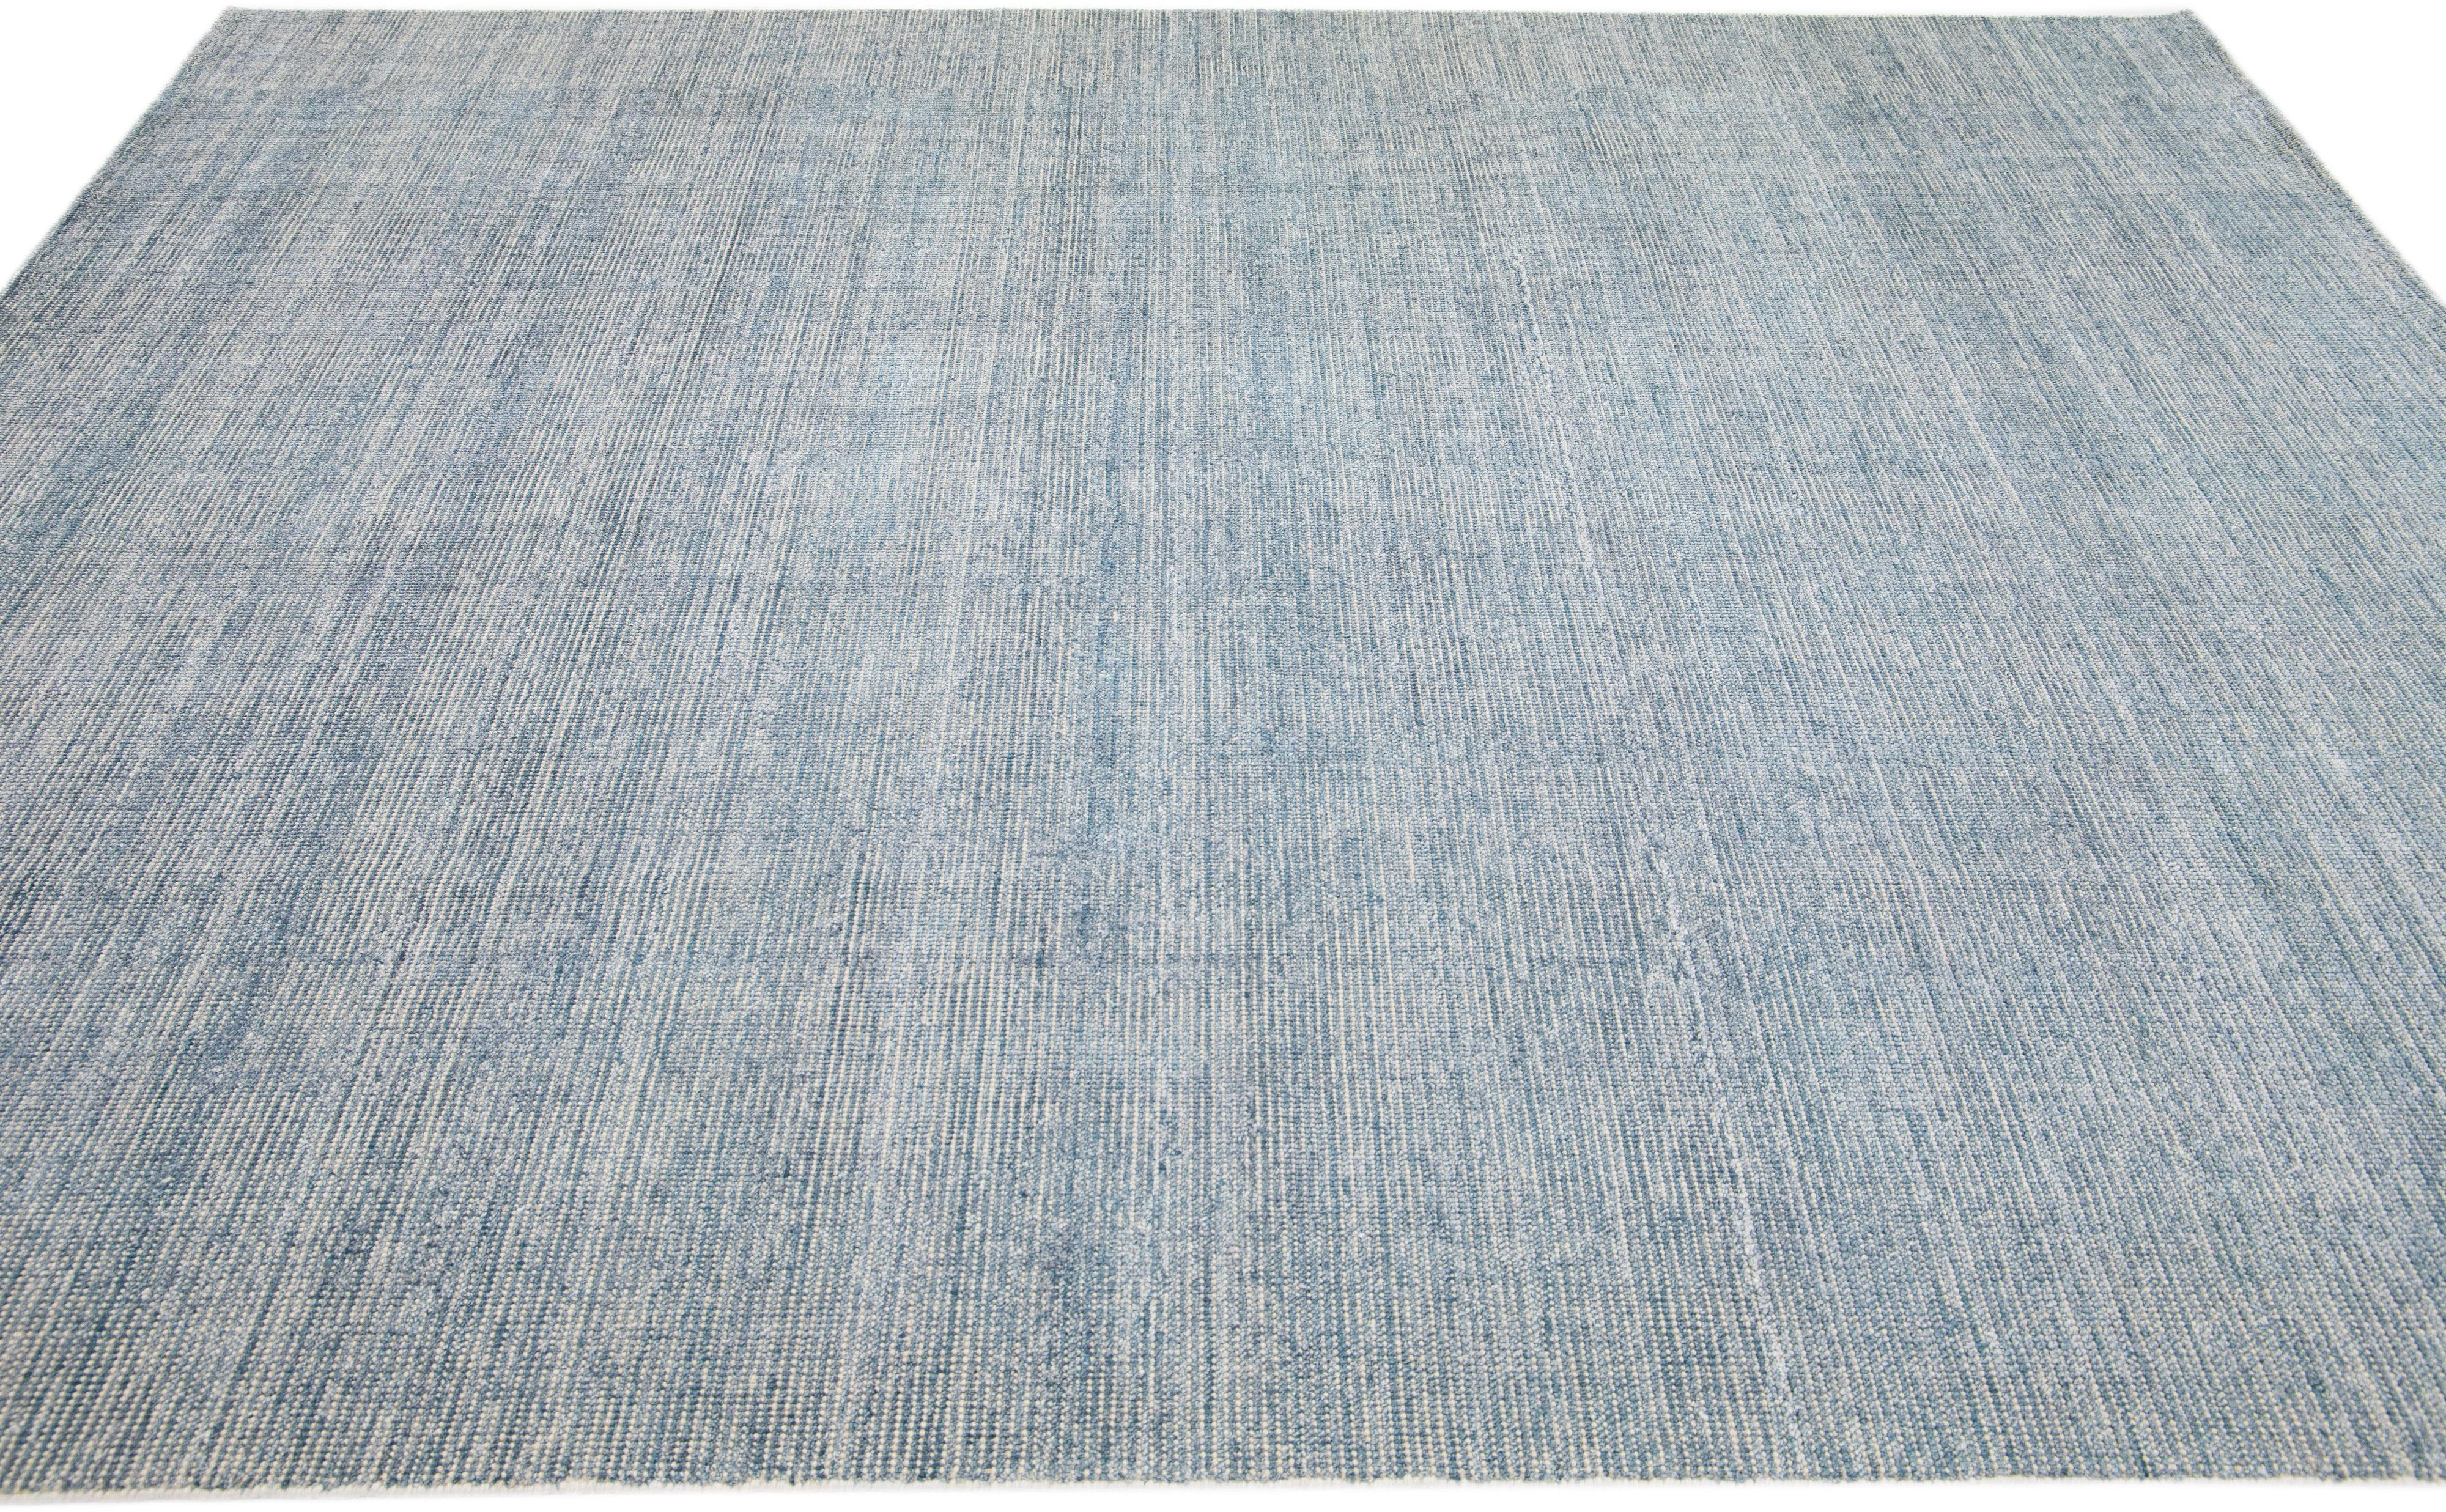 Beautiful Apadanas's handmade bamboo & silk Indian groove rug with a gray field. This groove collection rug has an all-over solid design.

This rug measures 8' x 10'.

Custom colors and sizes are available upon request.

